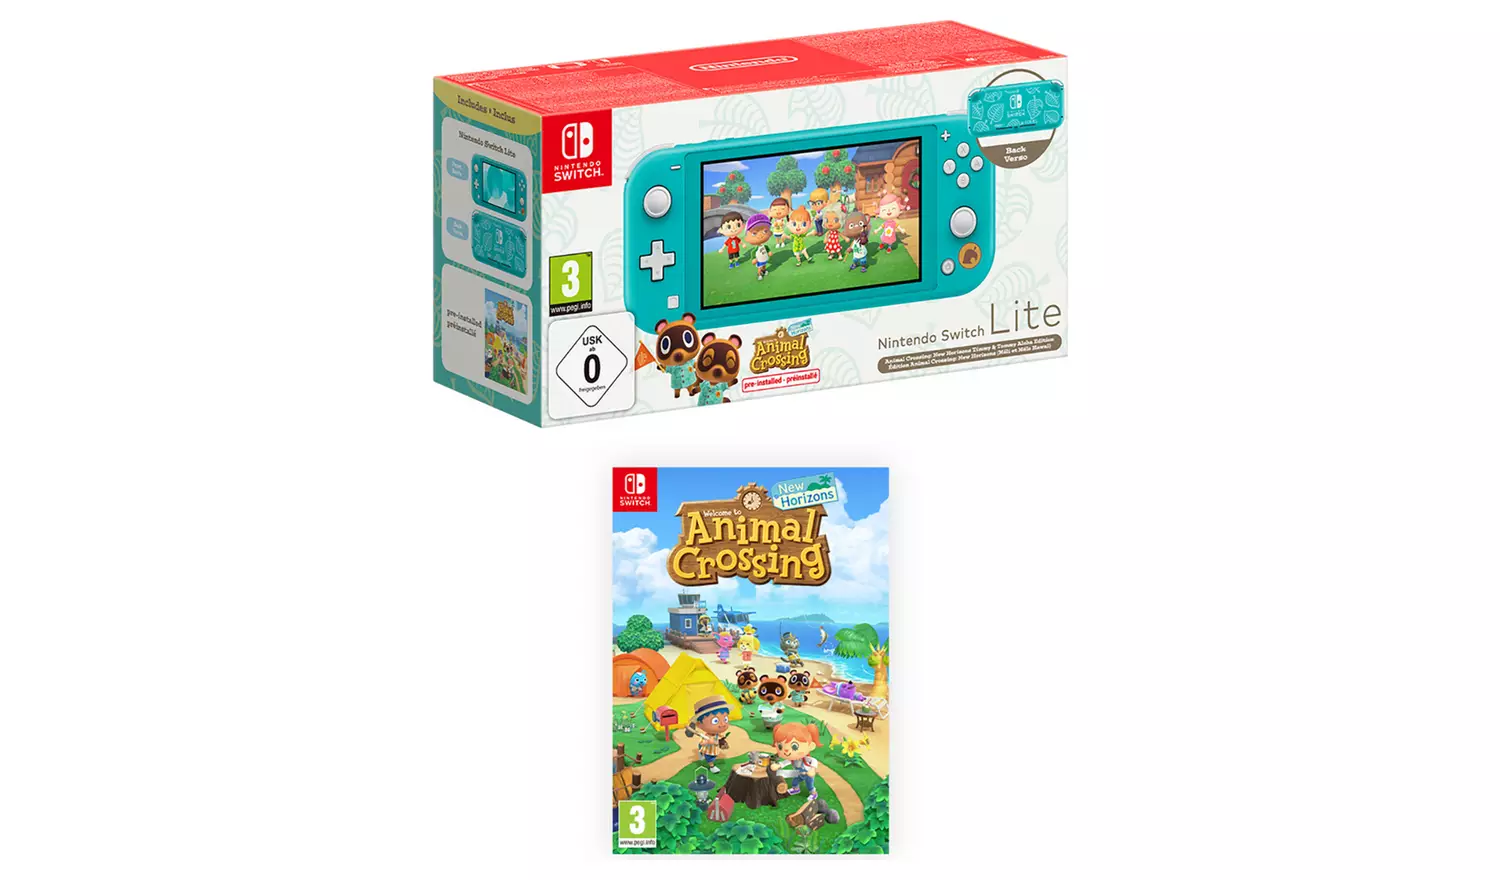 Don’t miss this Switch Lite + Animal Crossing + Free Game bundle